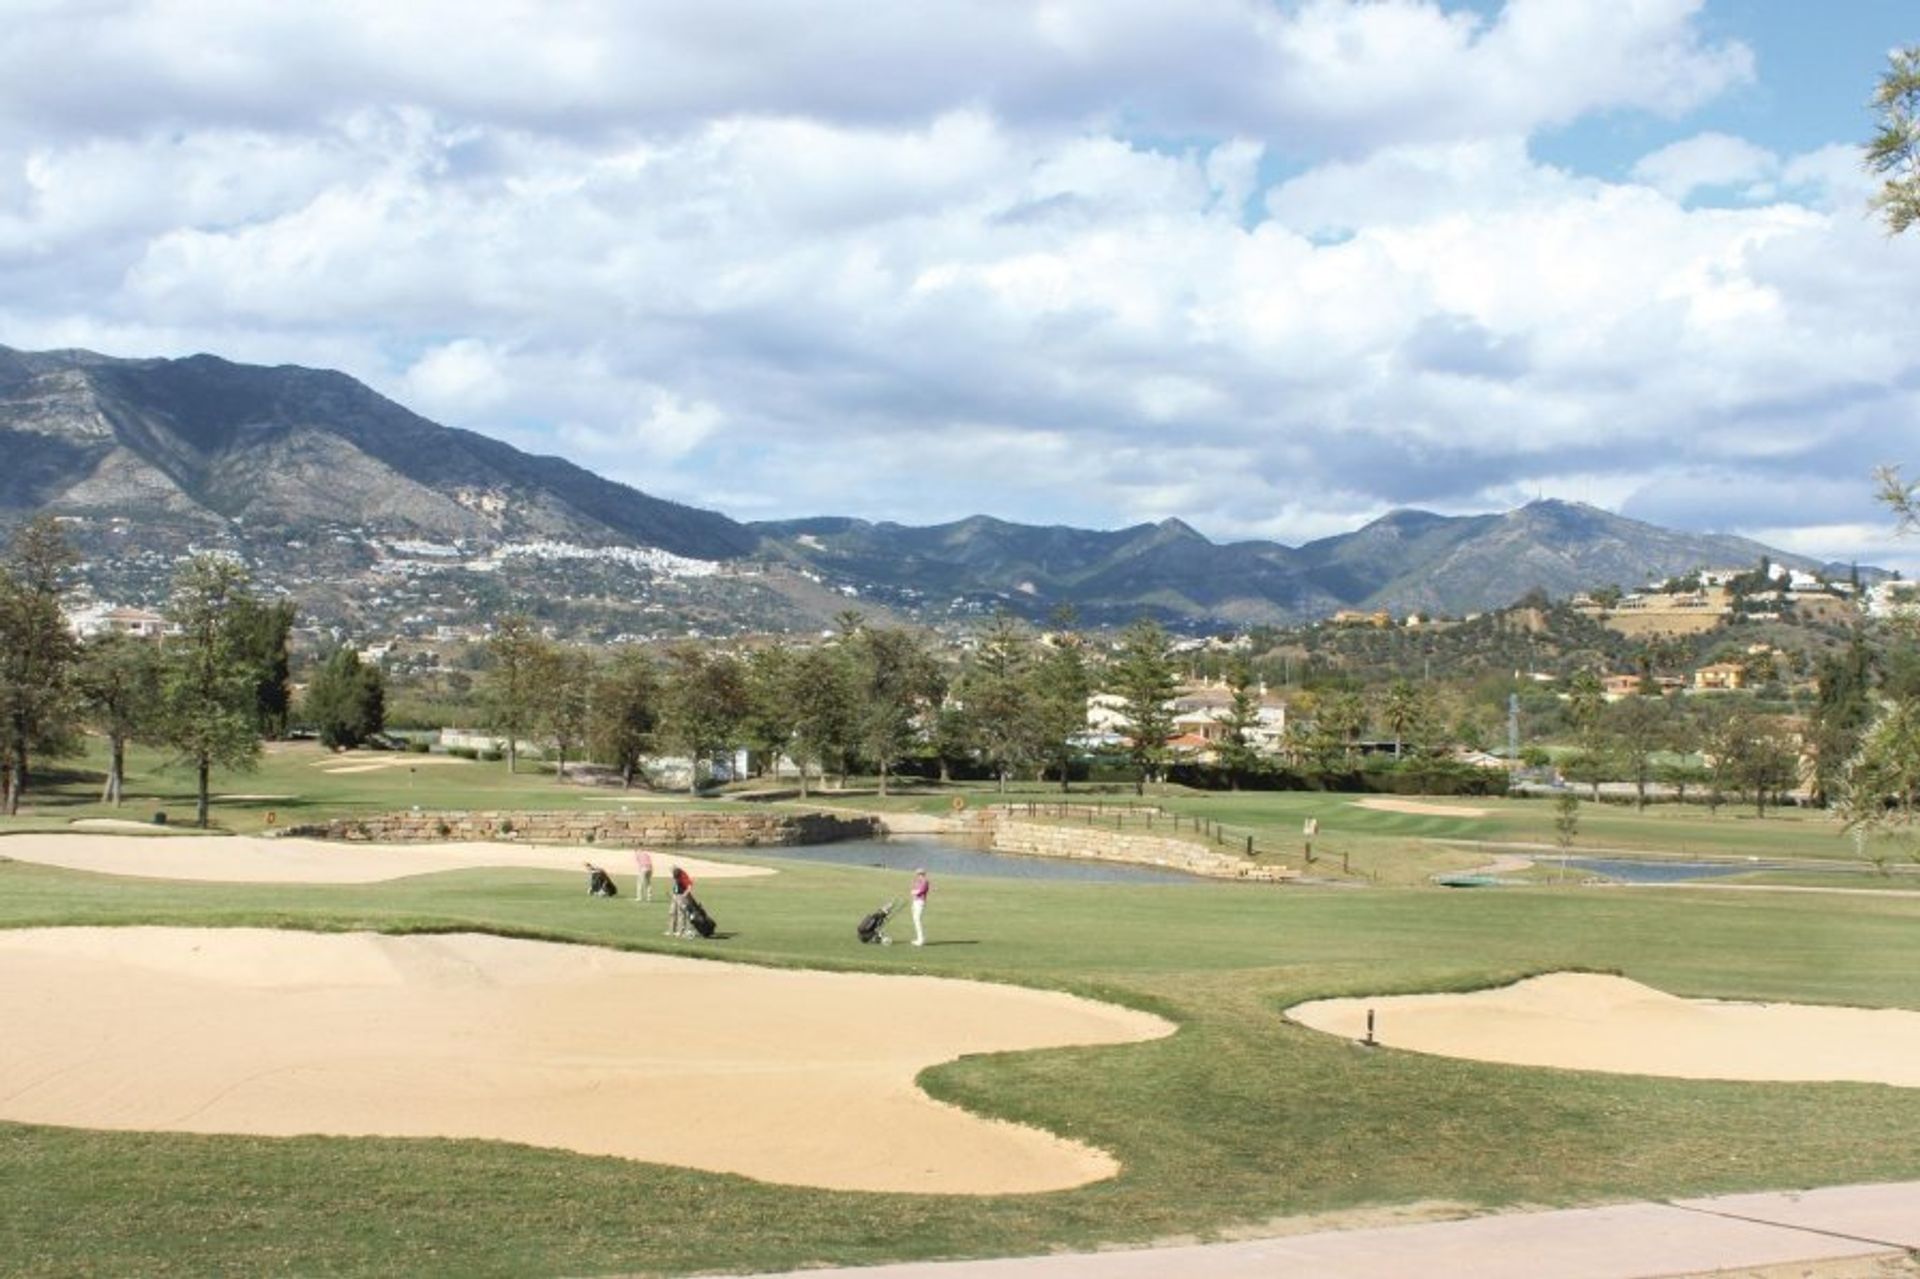 Boasting mountain views and picturesque lakes, the 18-hole golf course of Los Lagos caters for beginners and experts alike